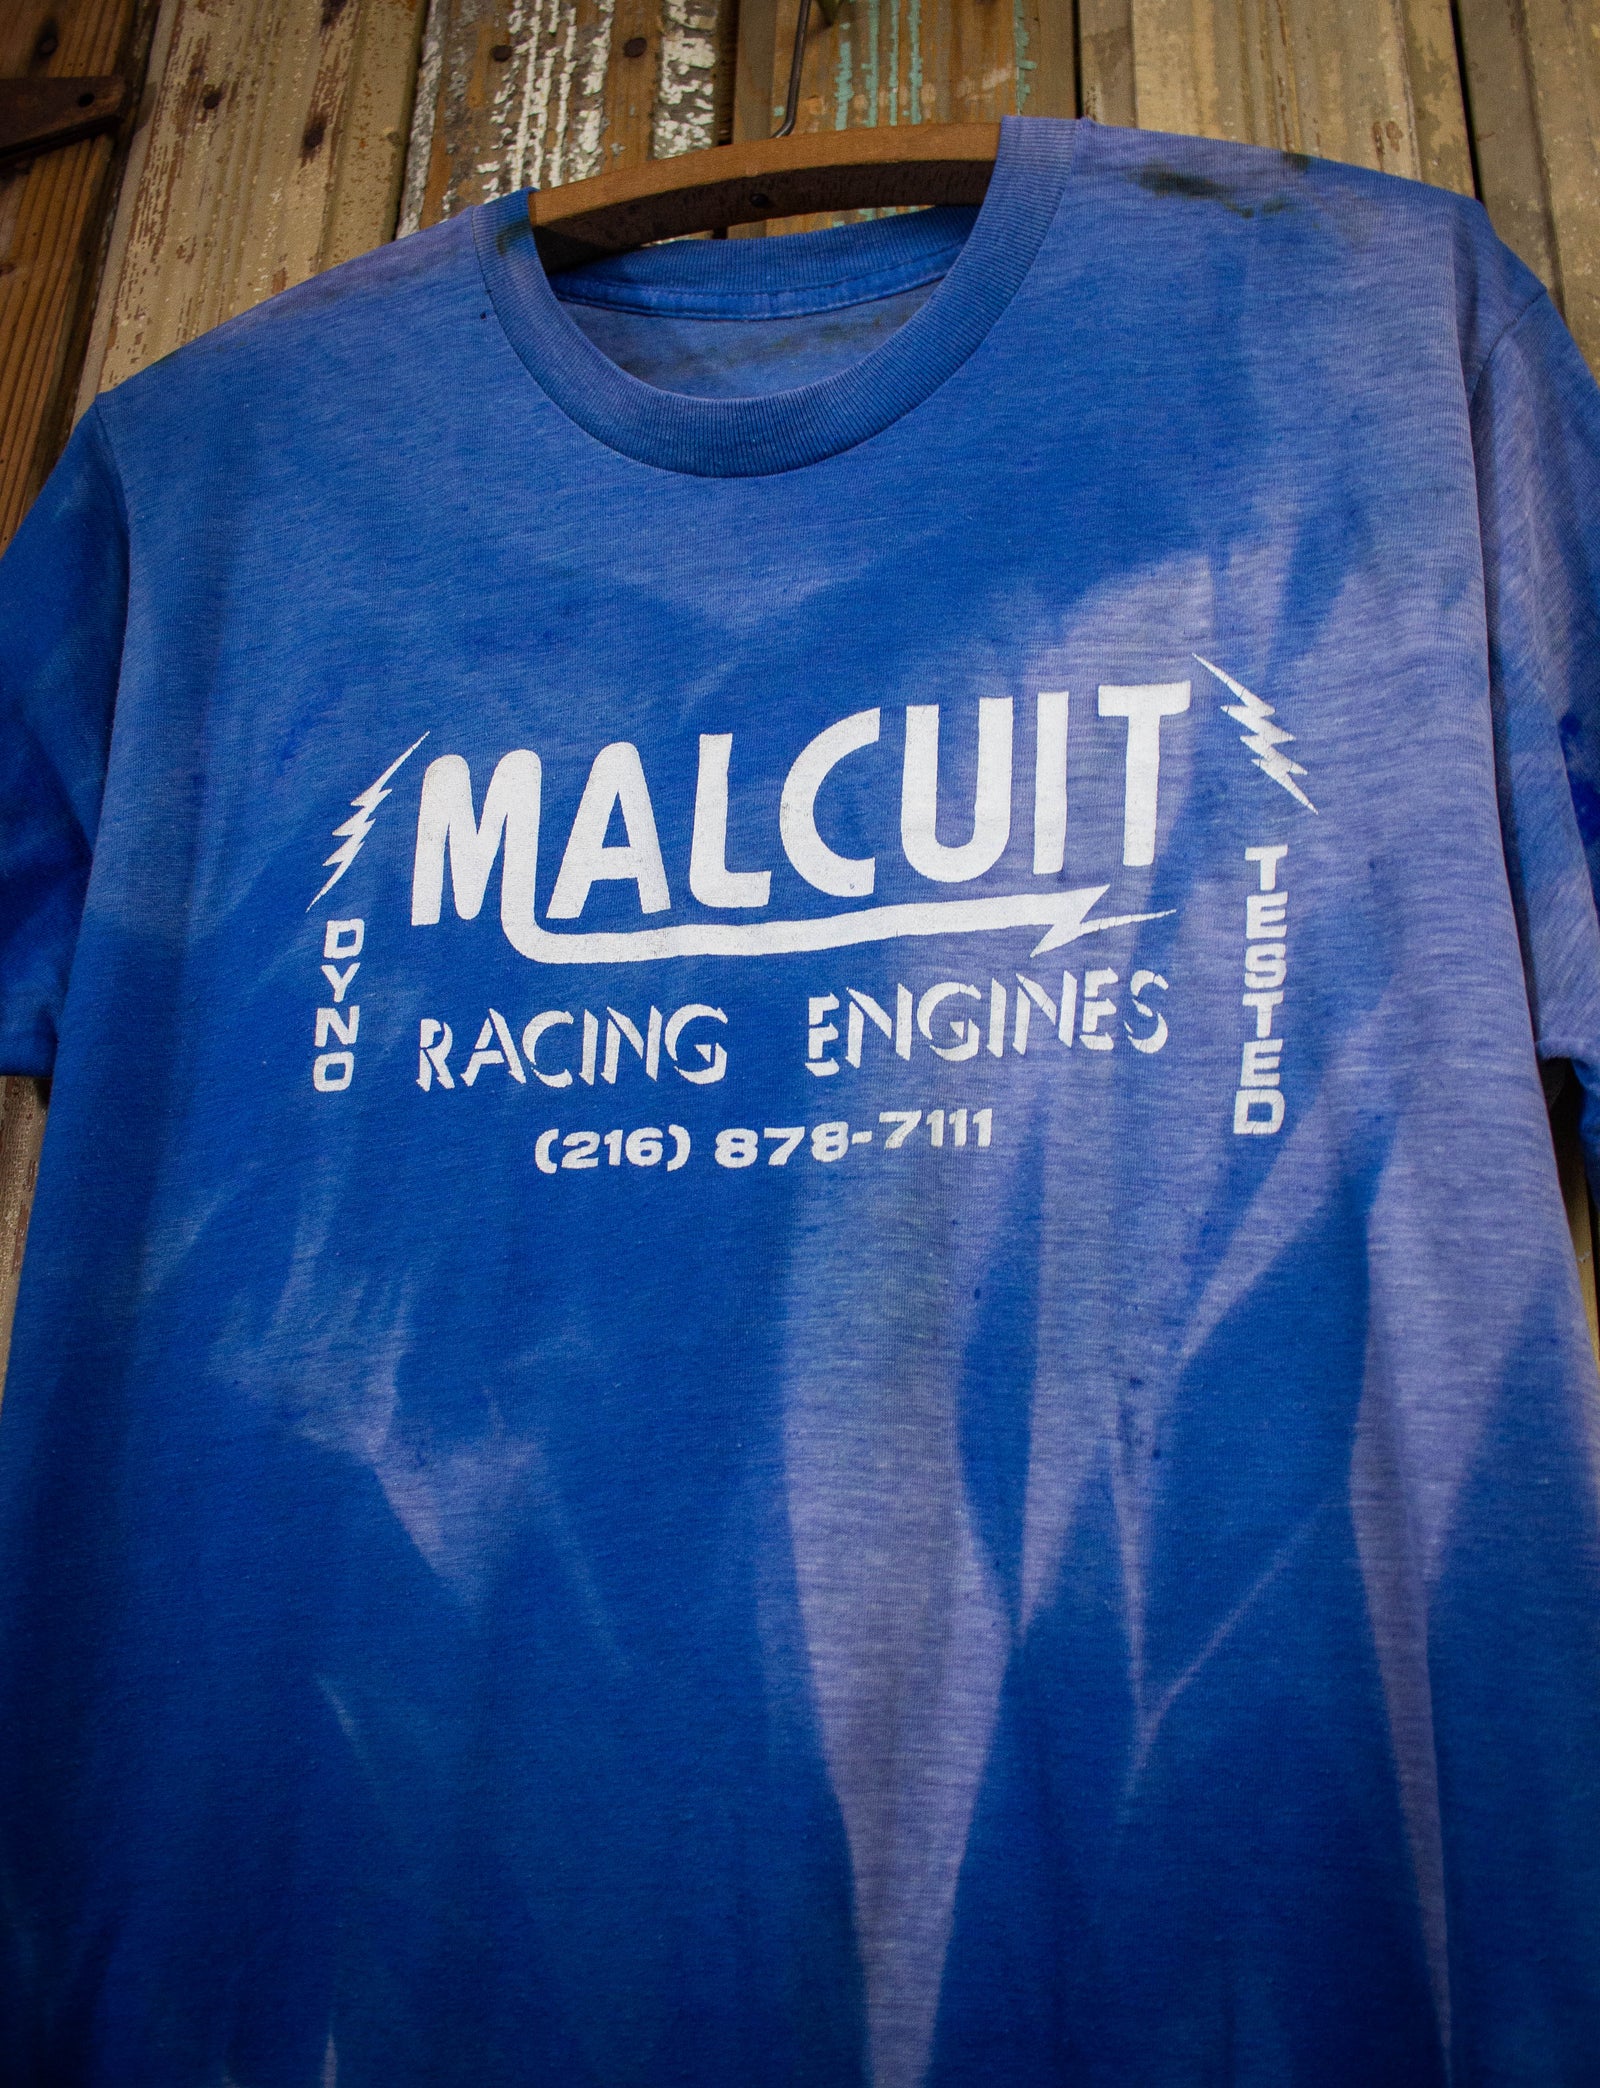 Vintage Malcuit Racing Engines Graphic T Shirt 80s Blue Large